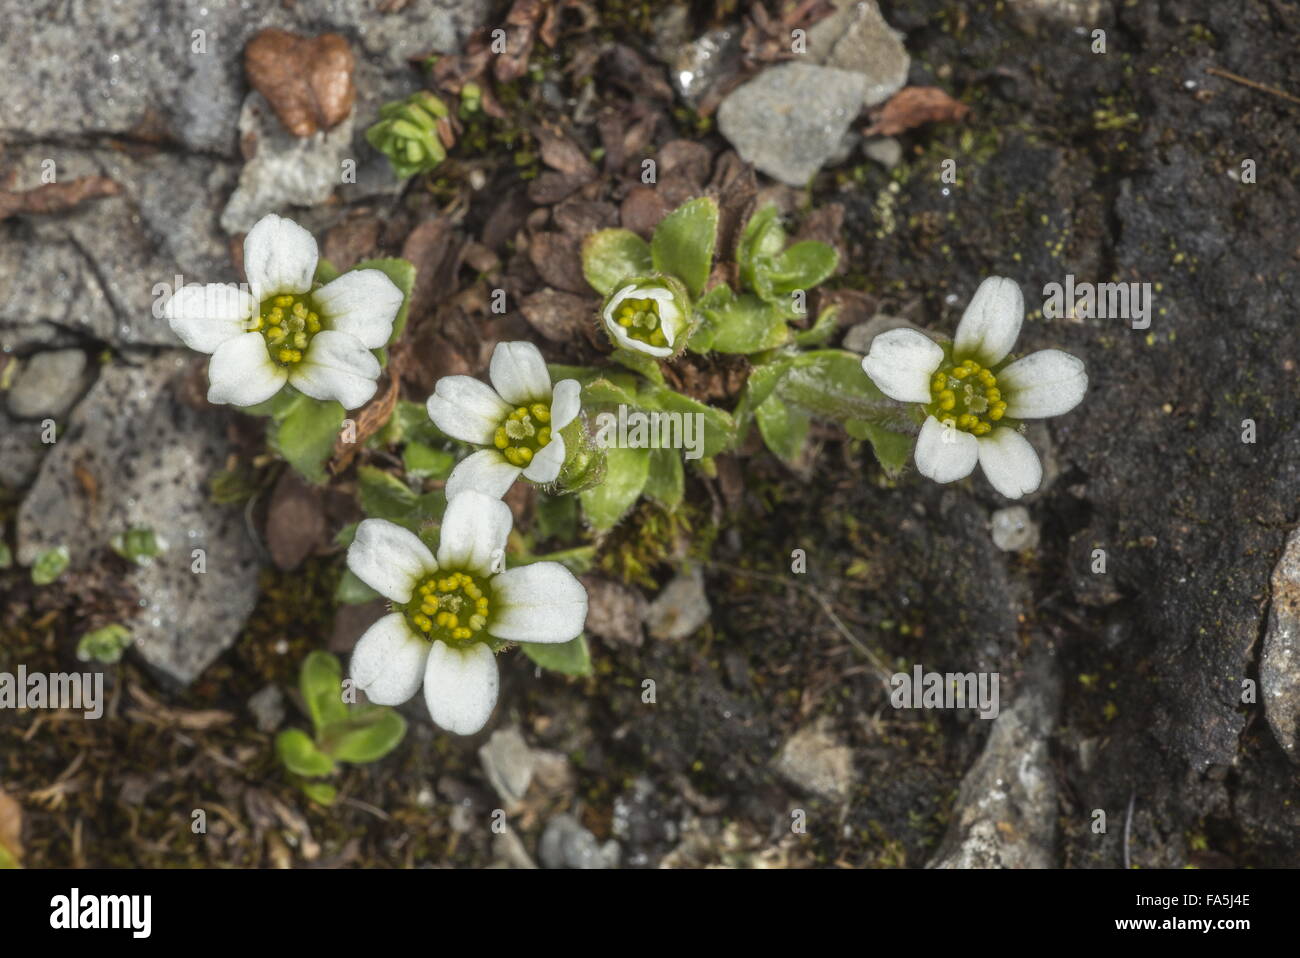 Scree Saxifrage, Saxifraga androsacea in flower in high snow-patch, Swiss Alps. Stock Photo